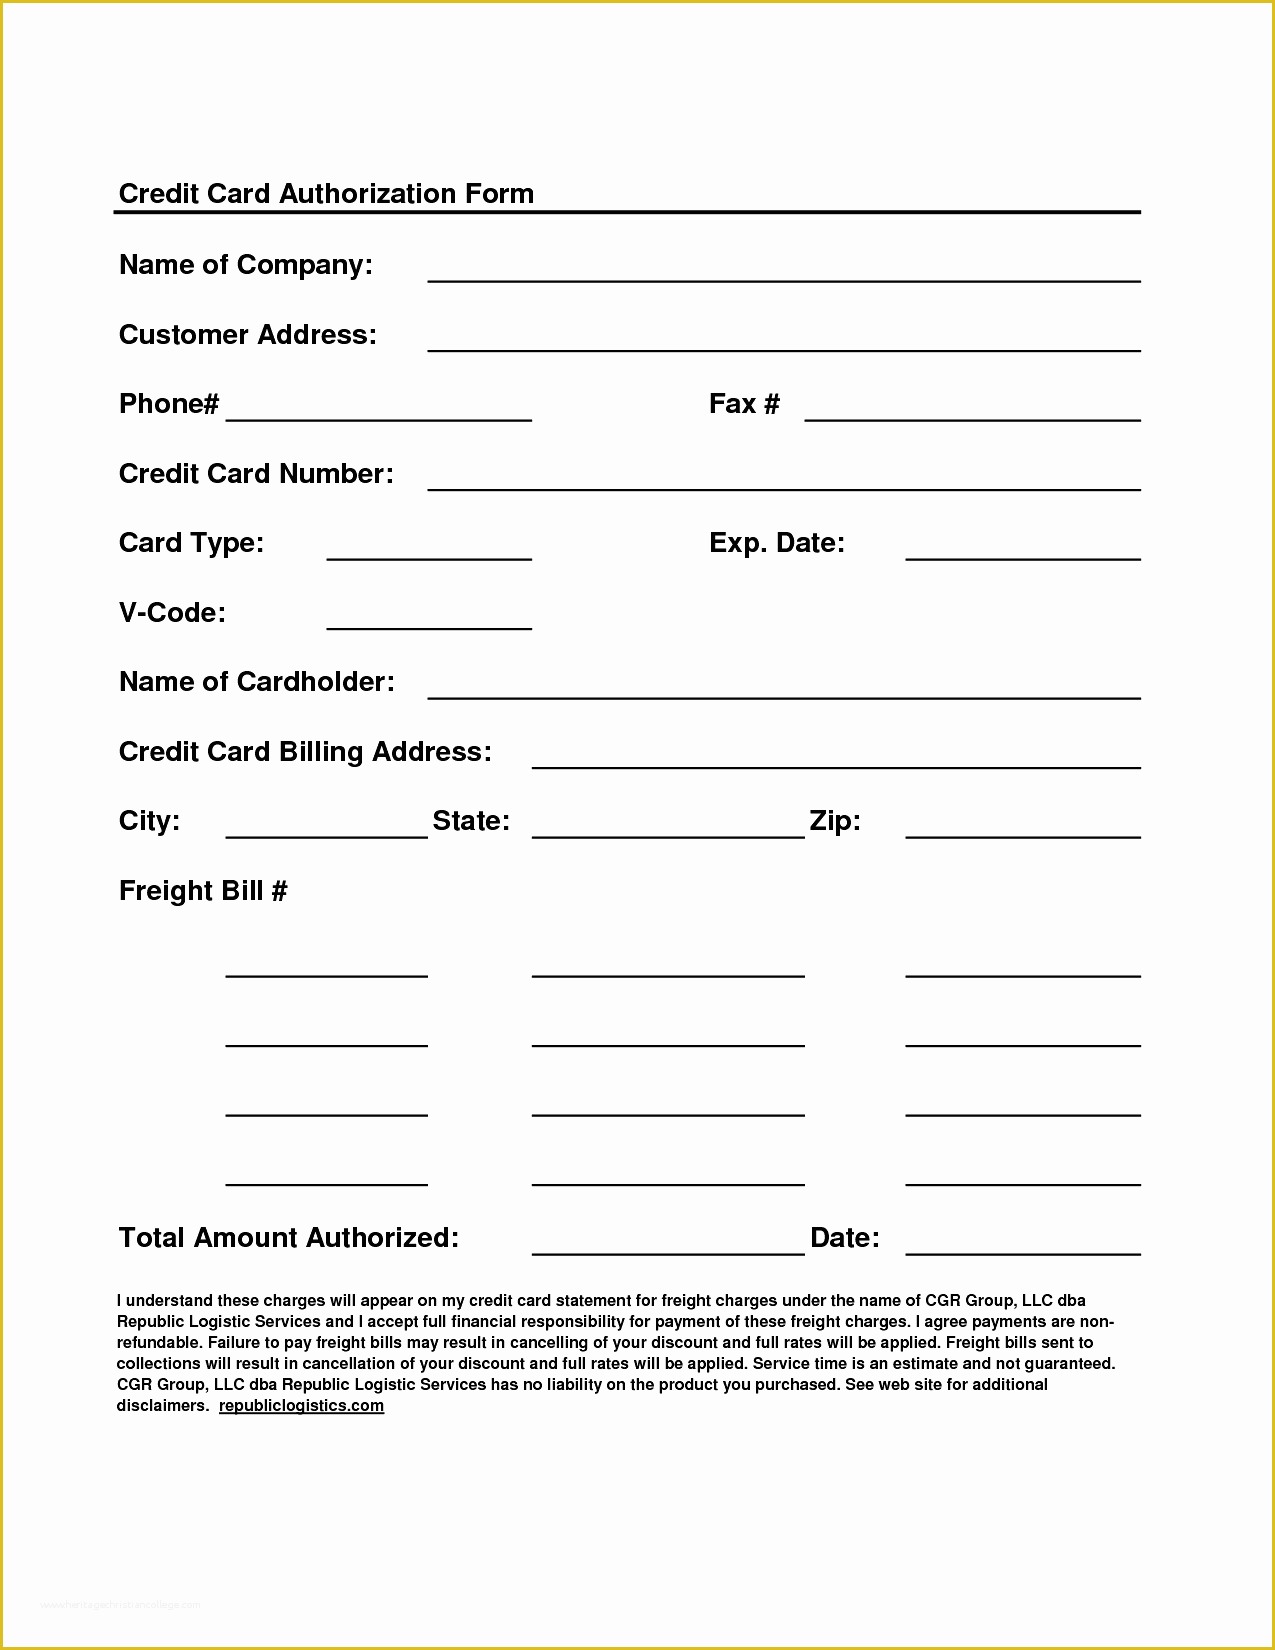 Free Credit Card Authorization form Template Word Of Business Templates Credit Card Authorization form Full